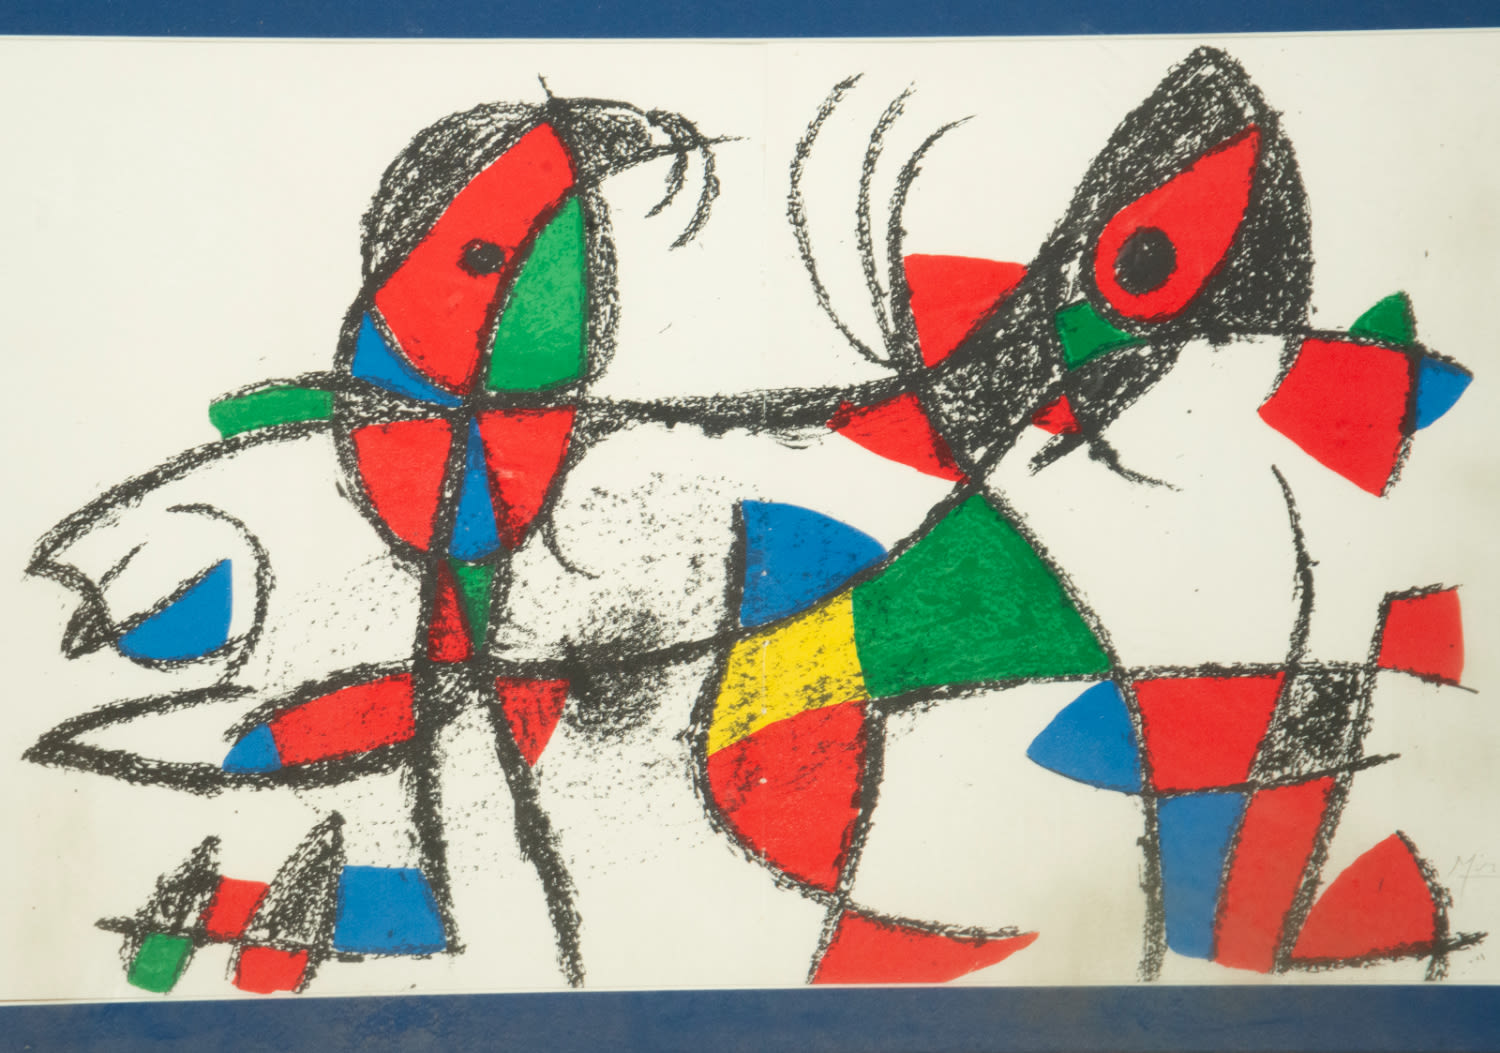 Lithograph X, Joan Miró (1893-1983), Catalan cubist school of the 20th century - Image 2 of 4